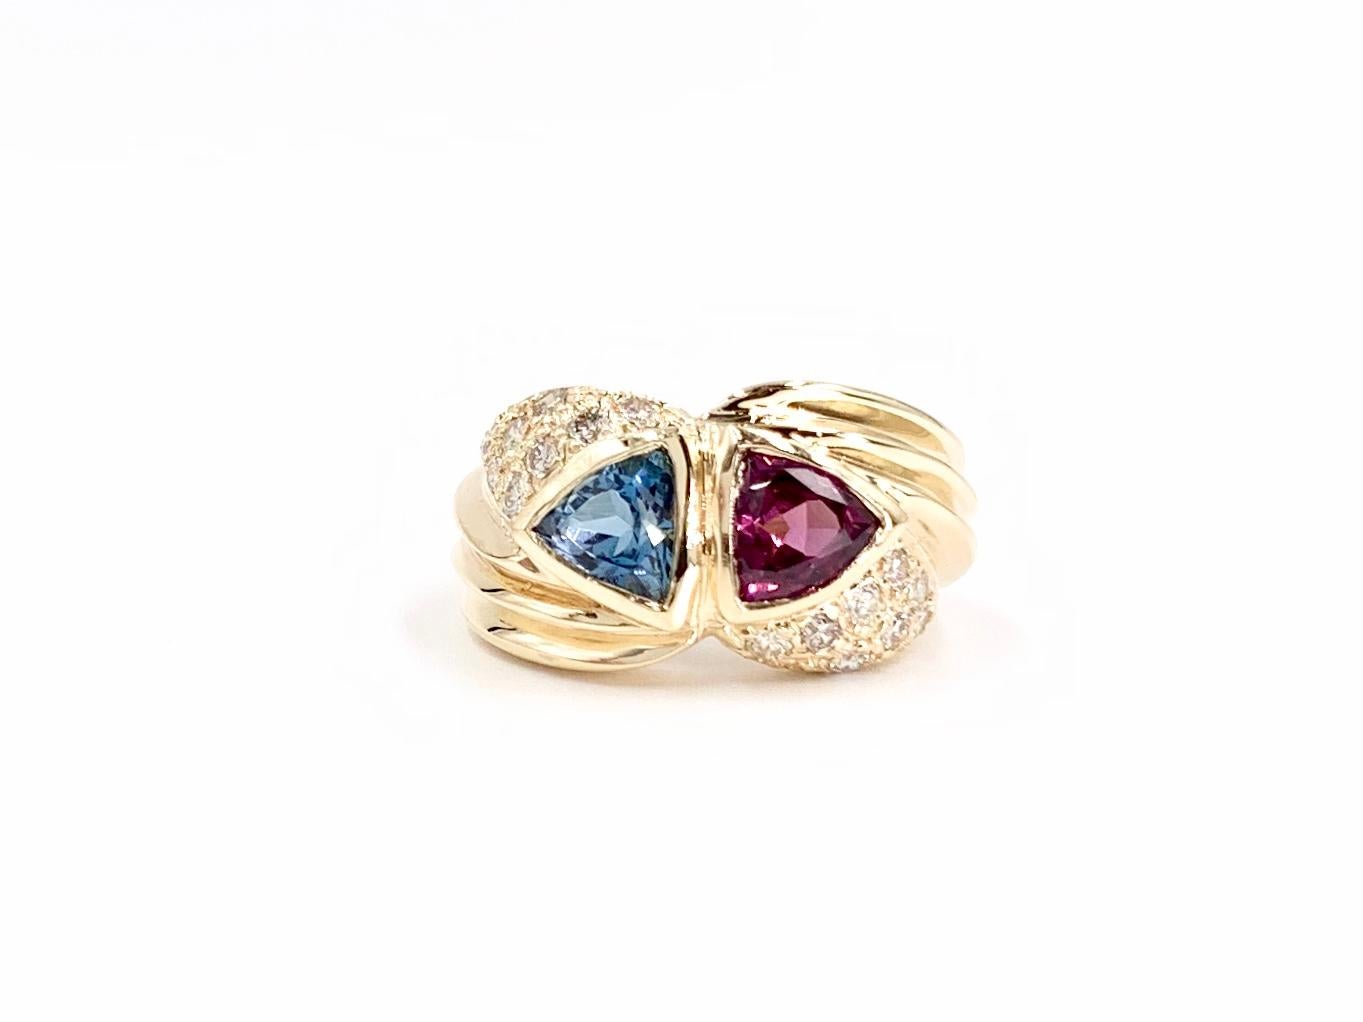 A colorful, one of a kind 14 karat yellow gold modern wide ring featuring a trillion blue topaz and a trillion rhodolite garnet perfectly bezel set and accented with .48 carats of white round brilliant diamonds. Diamond quality is approximately G